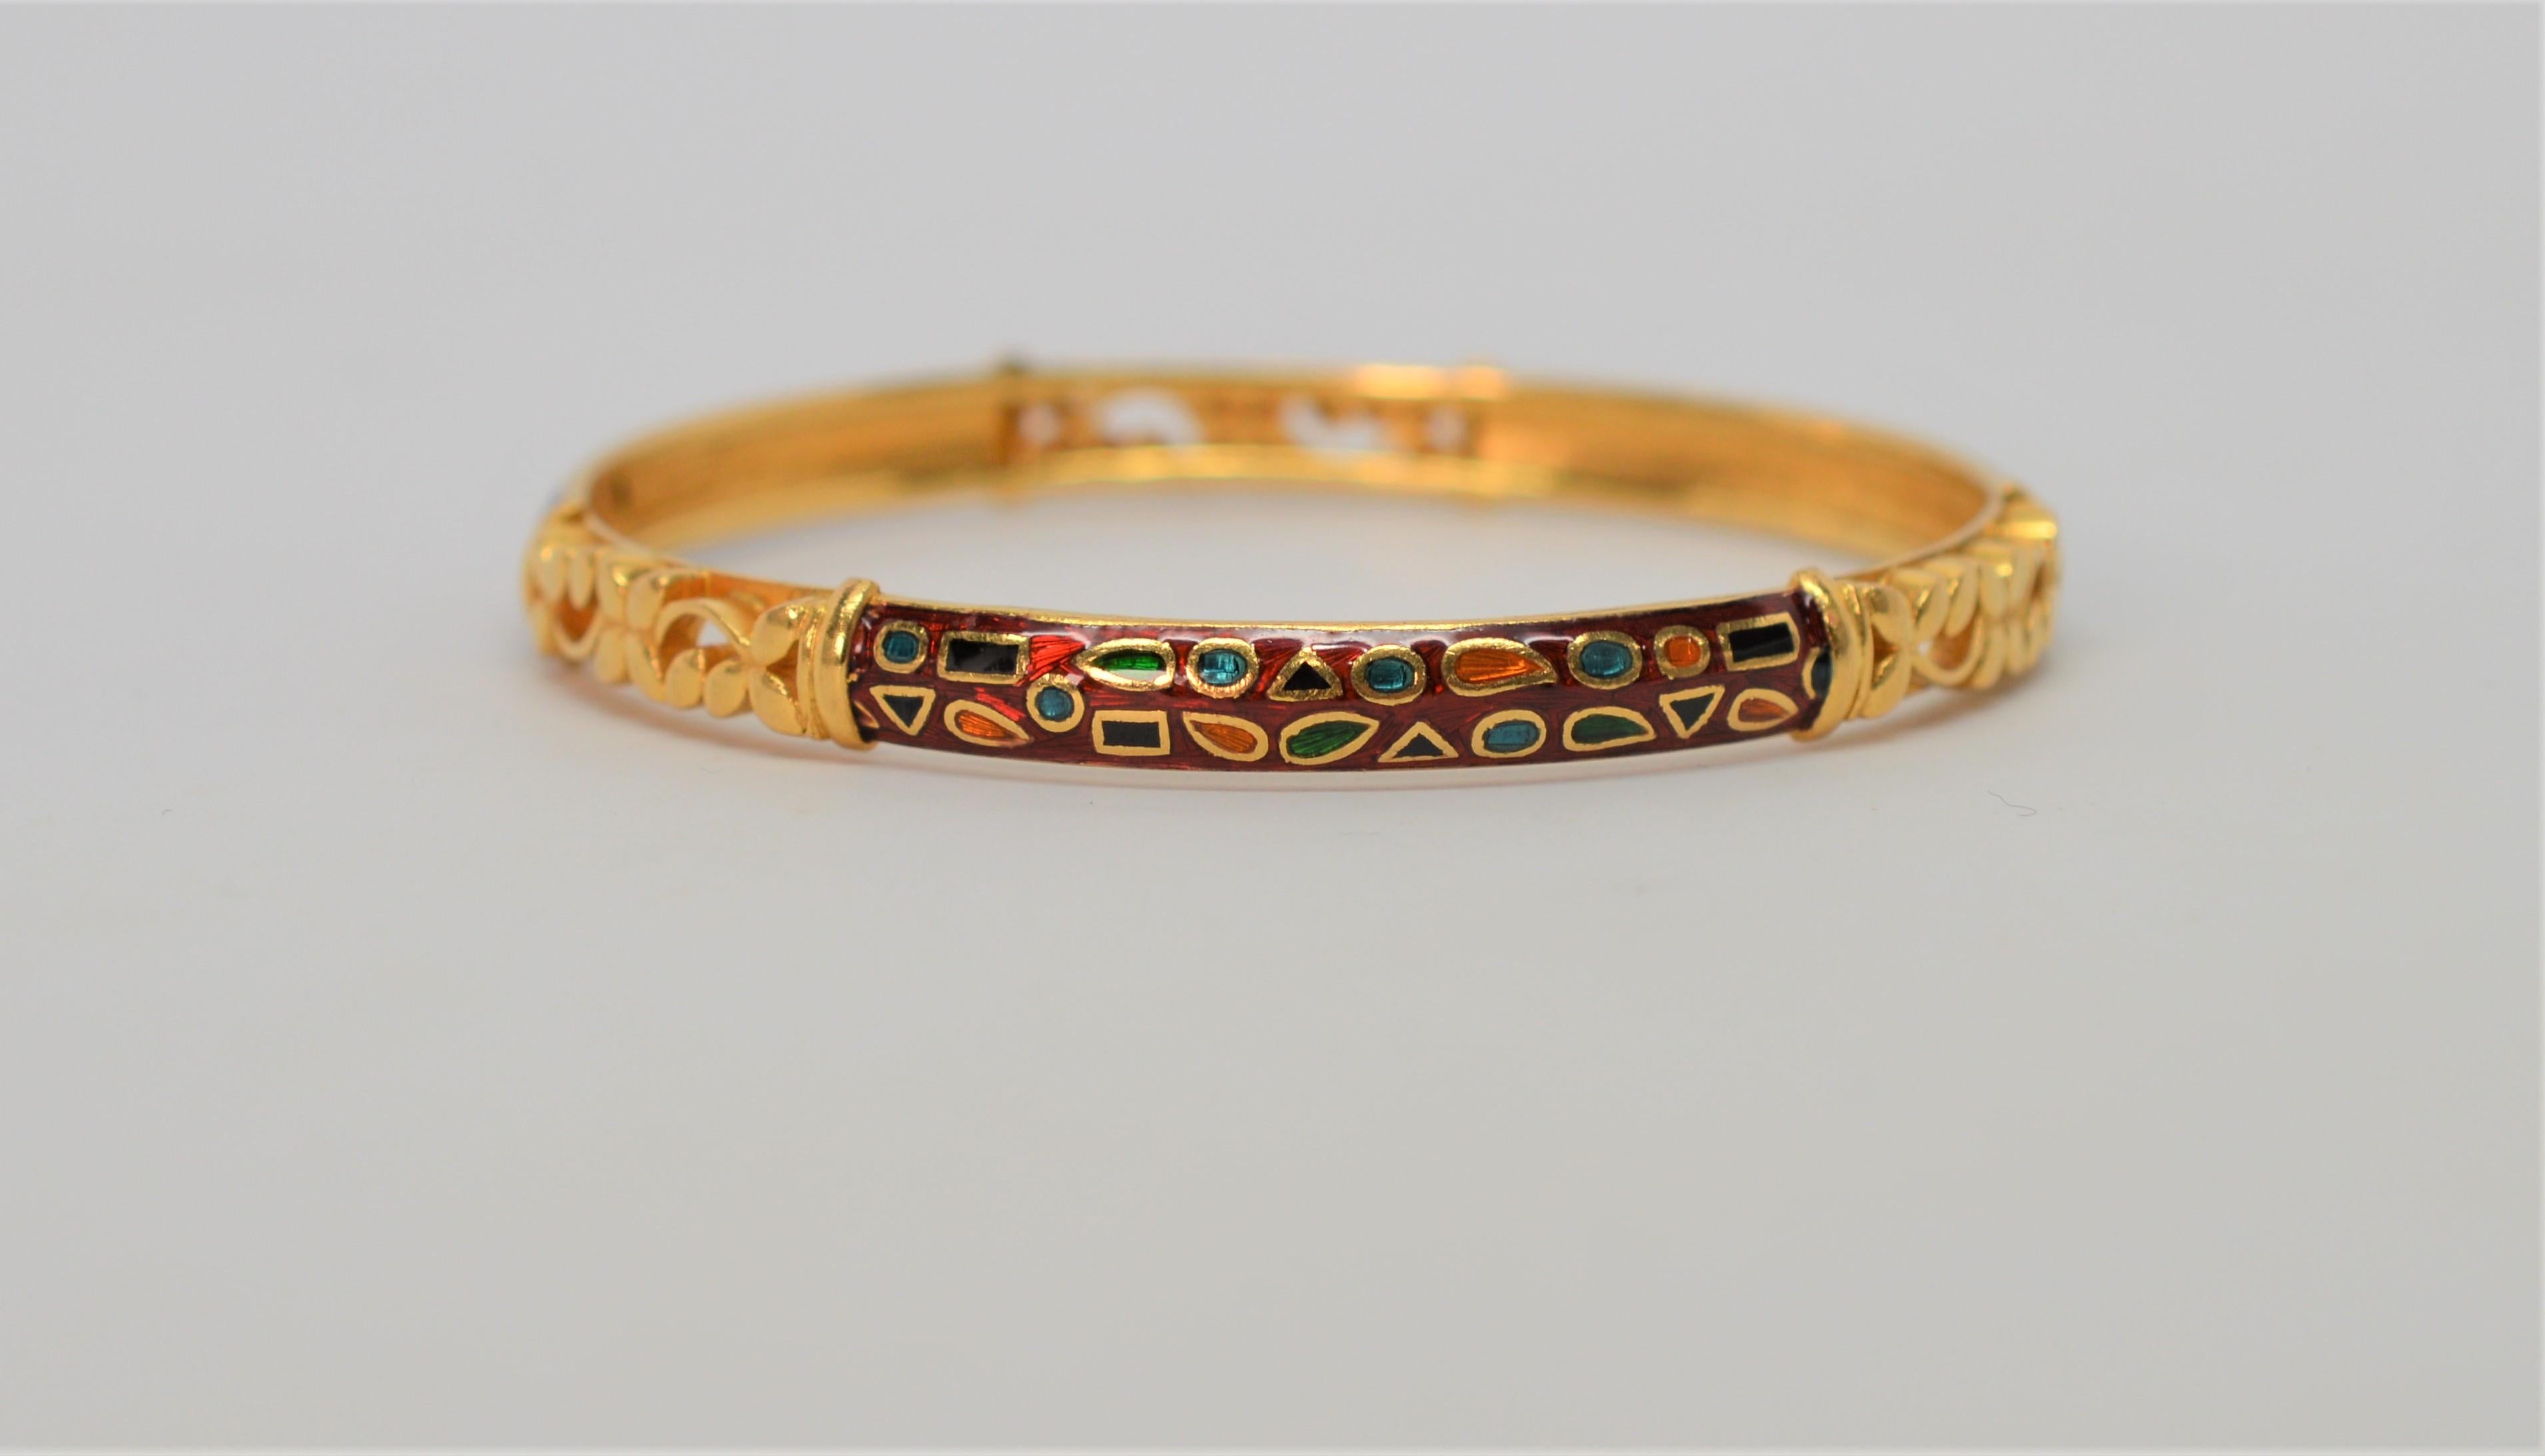 A kaleidoscope of colors decorate this 22 Karat Yellow Gold Bracelet with its expertly hand-applied enamel design. Measuring 2-1/4 inches in diameter and with a 7 inches circumference, the design is complimented with gold filigree plackets. In gift